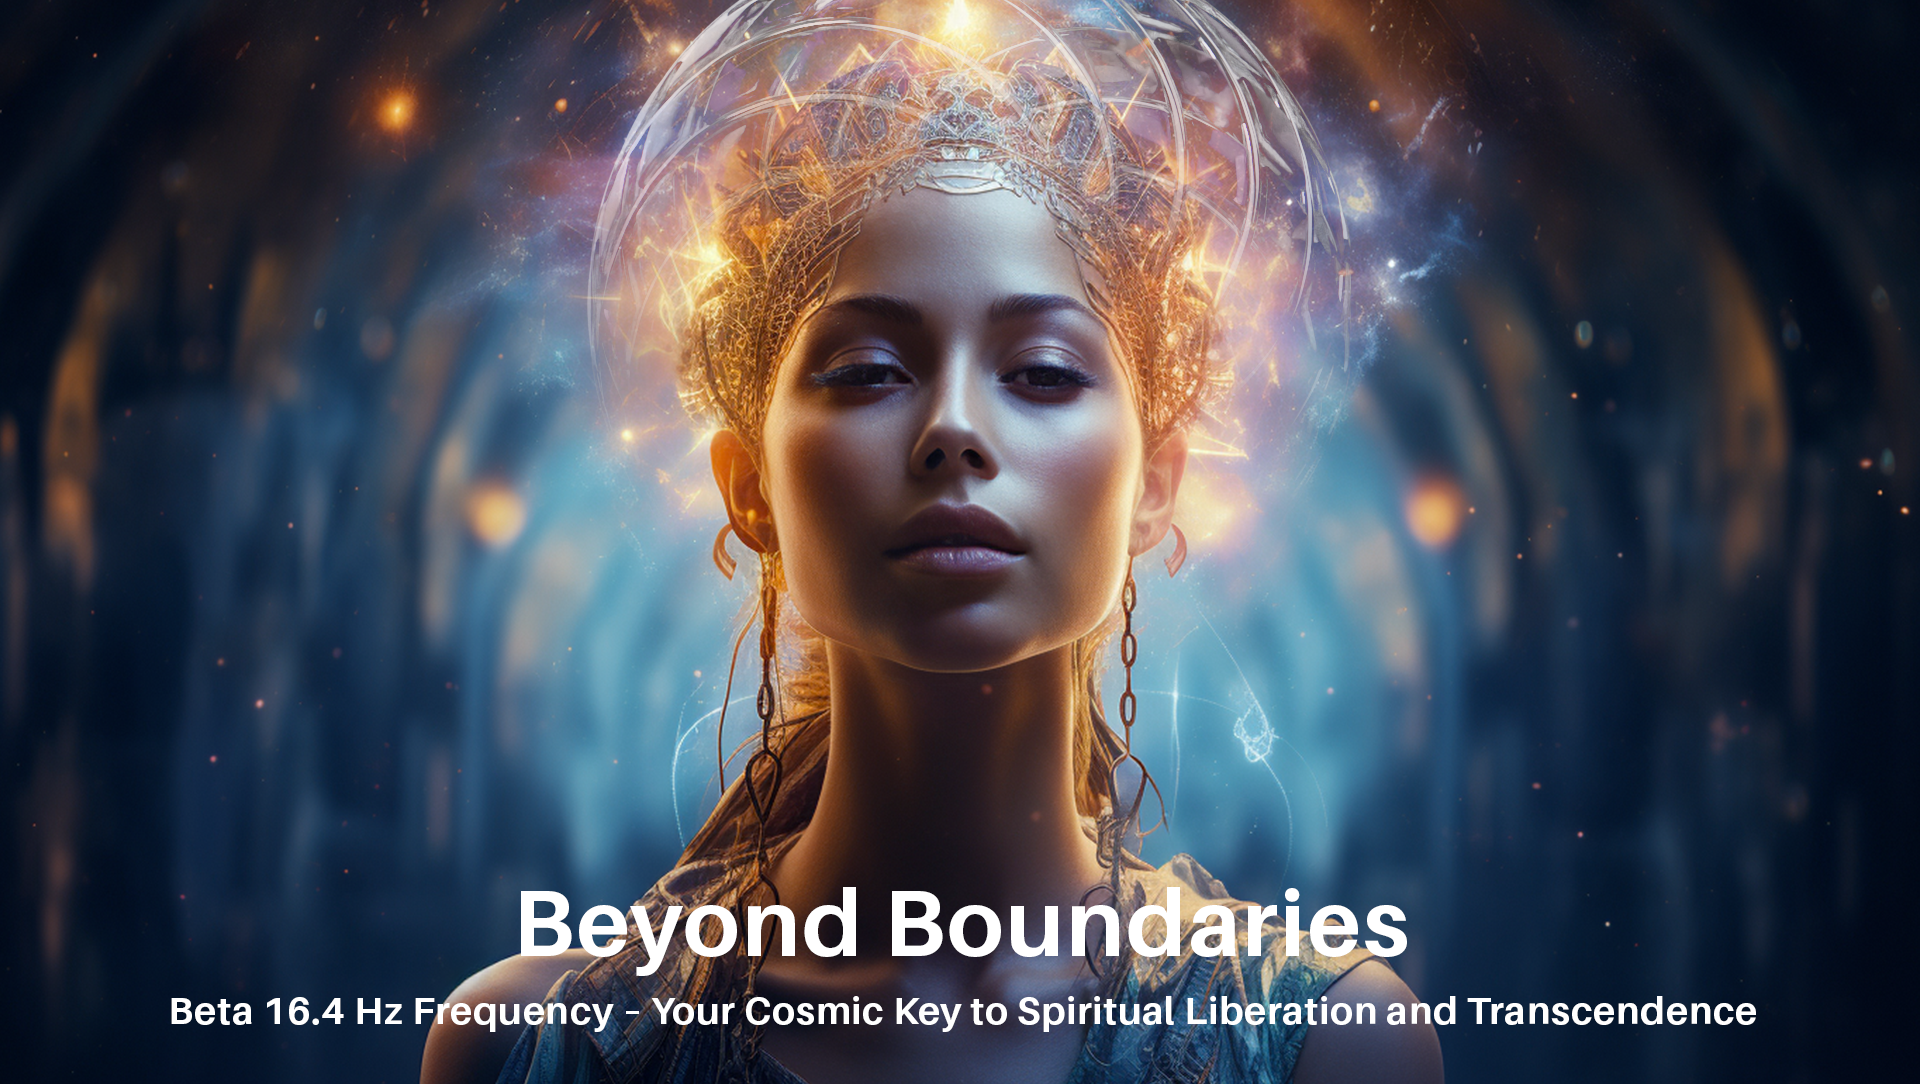 Beyond Boundaries: Beta 16.4 Hz Frequency – Your Cosmic Key to Spiritual Liberation and Transcendence